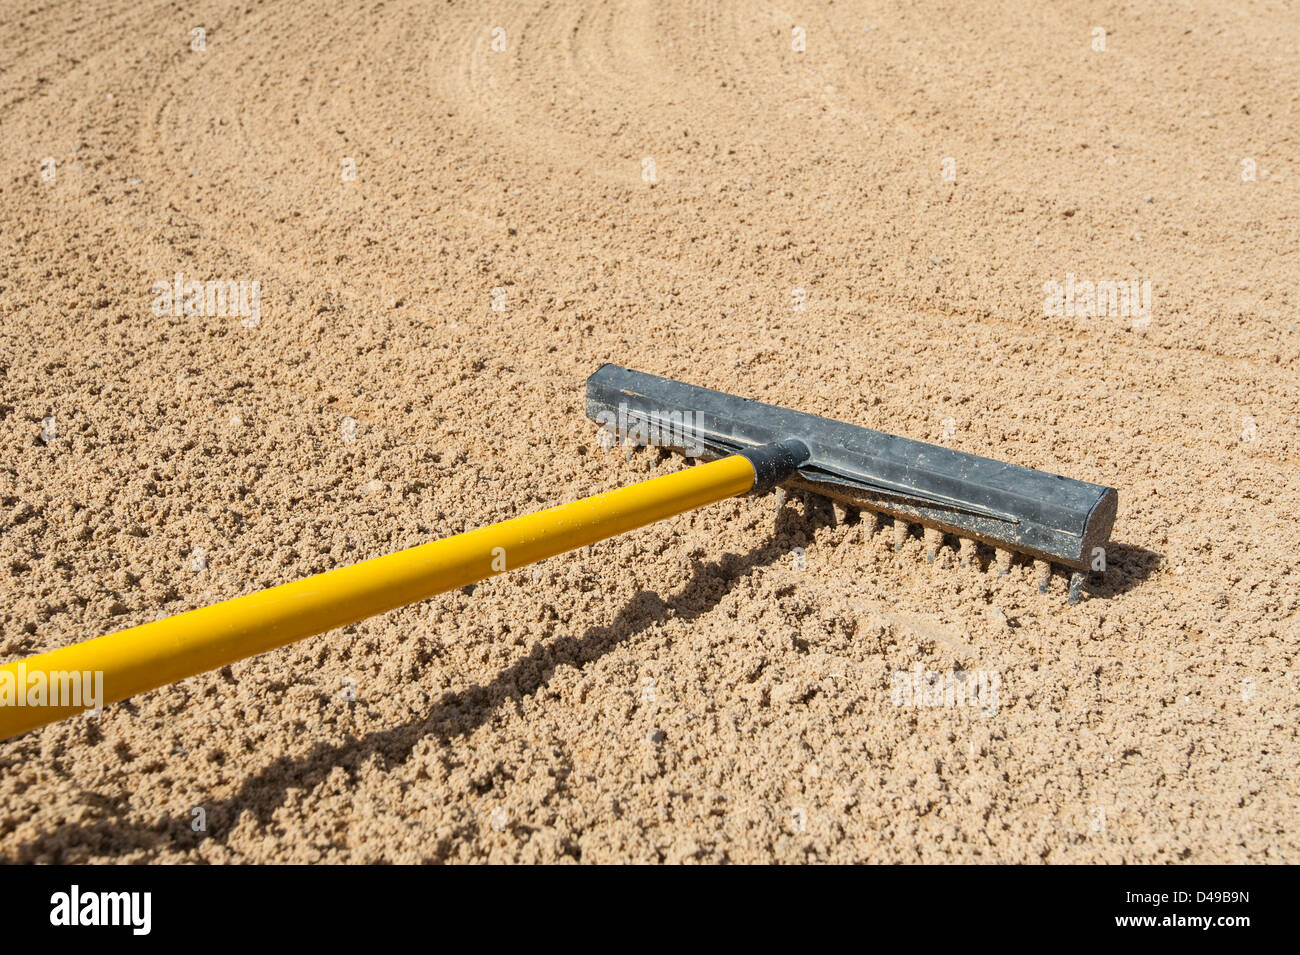 Rake in a bunker on golf course Stock Photo